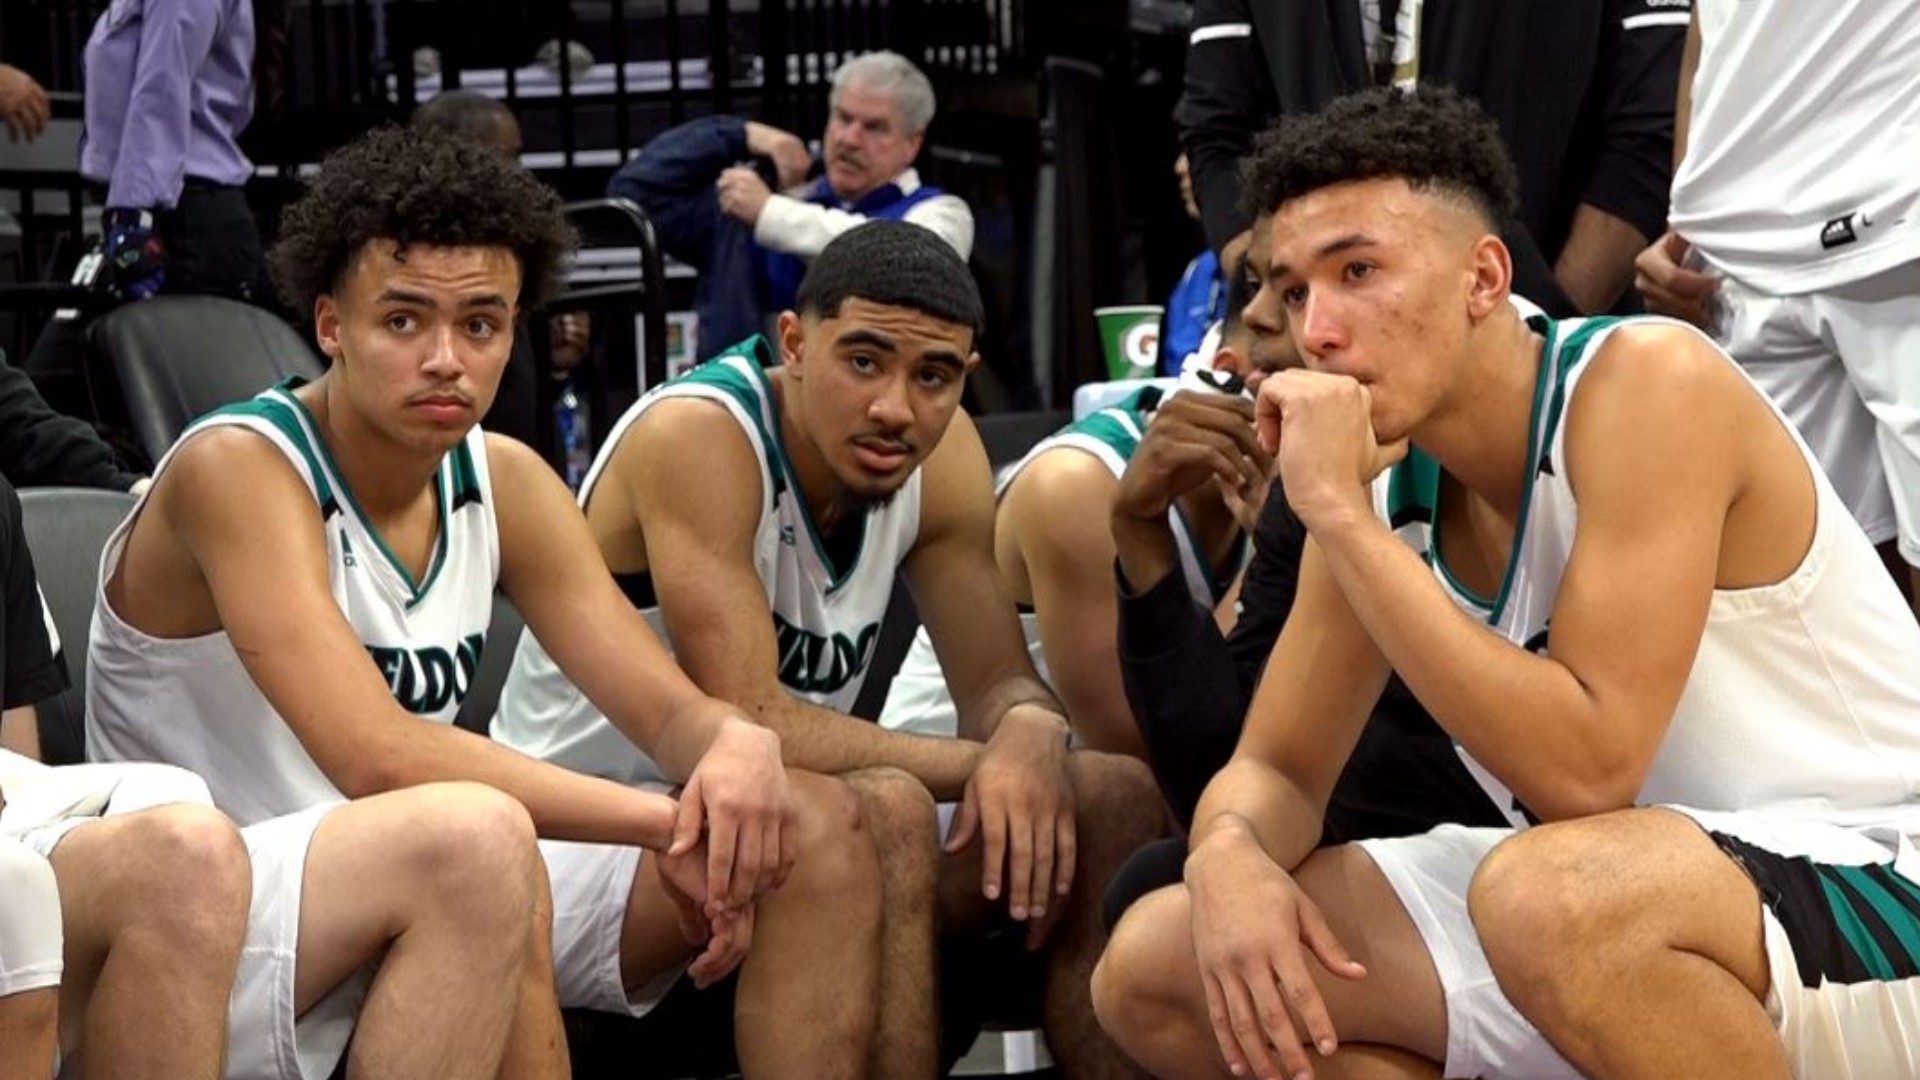 For the second straight season, the Sheldon Huskies fall to Sierra Canyon in the CIF Boys Open Division State Championship, as the Timberwolves win in dominant fashion 76-52 on Saturday night at Golden 1 Center.

The Huskies had a tough night shooting, as Marcus Bagley led Sheldon with 17 points, but Sierra Canyon's Kenyon Martin Jr. scored a game-high 23 points, and the Timberwolves used a 28-14 second quarter to put enough distance between the opposition en route to their state title.